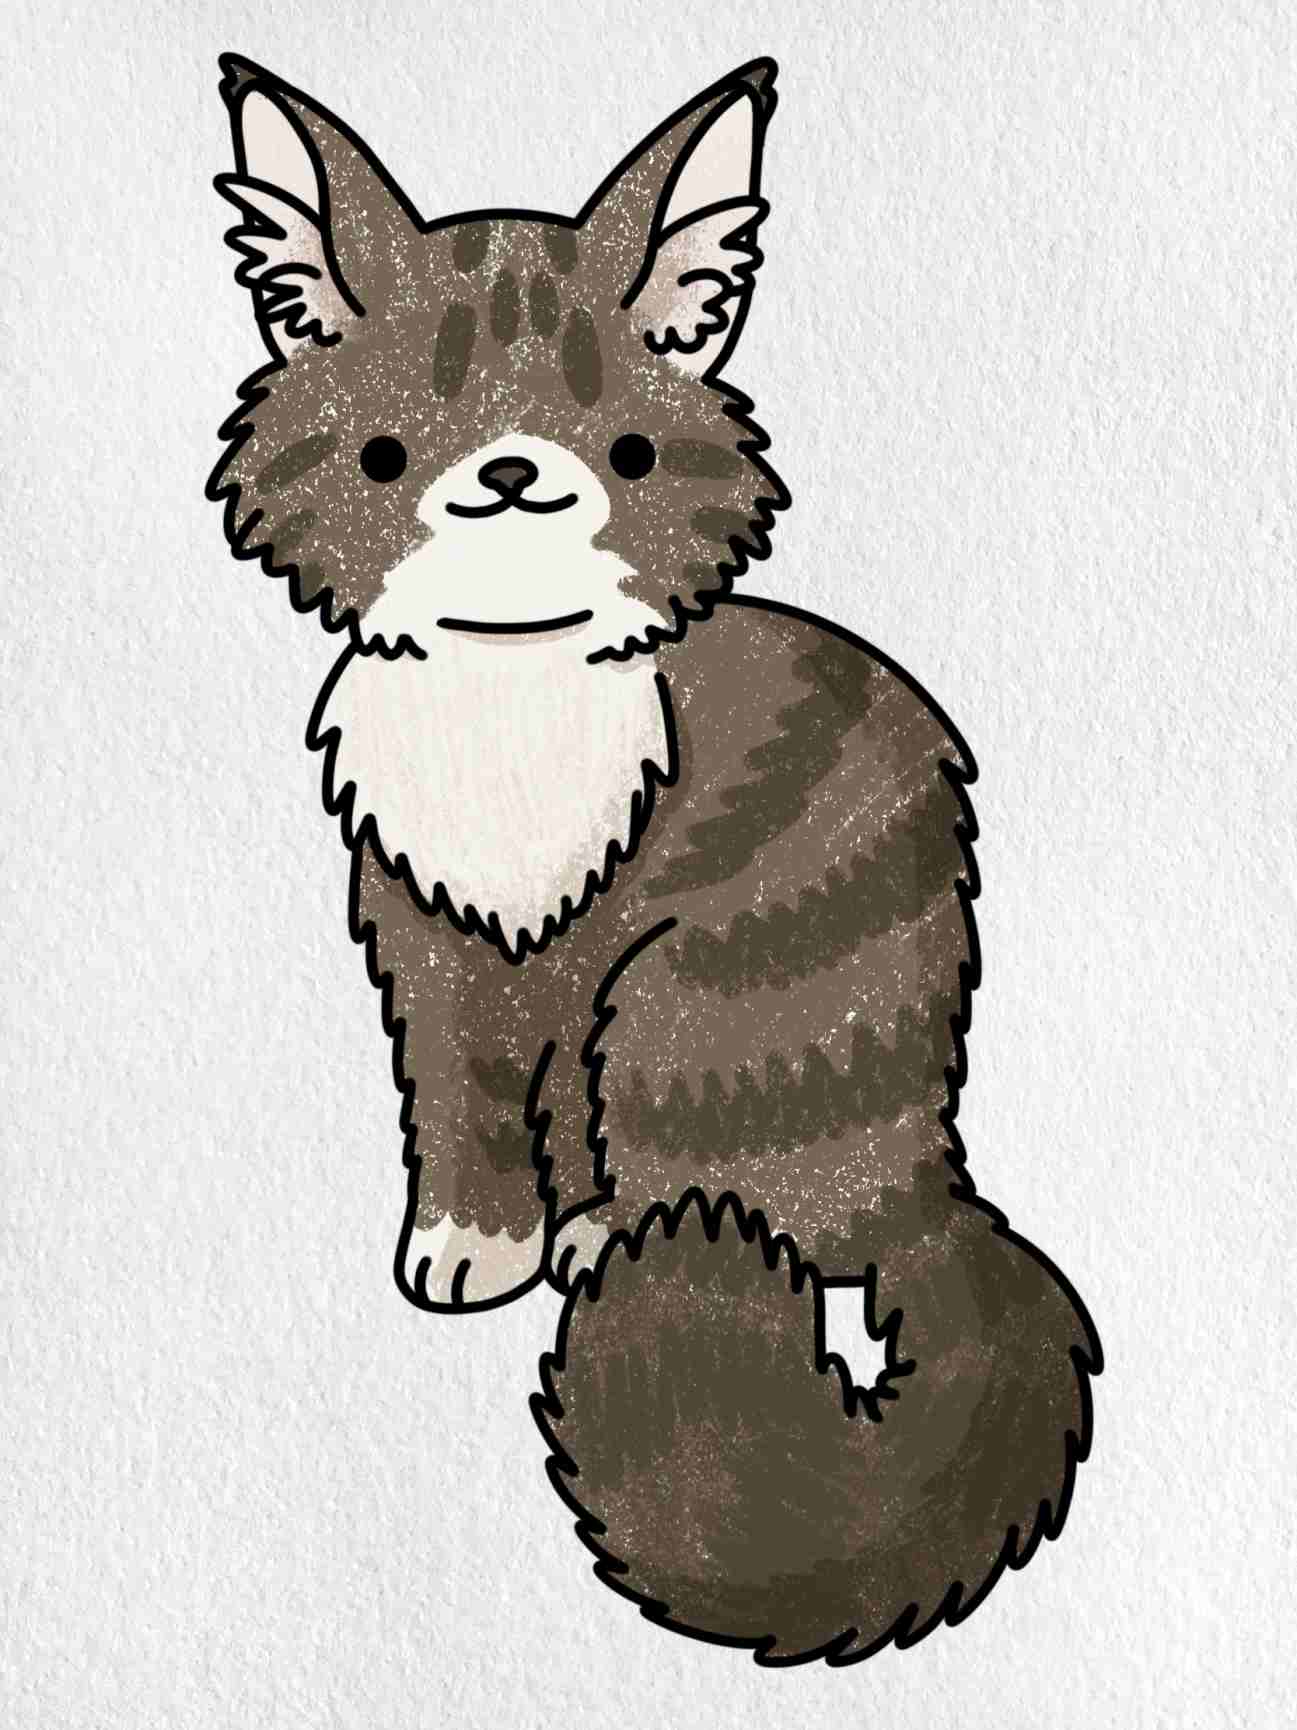 Maine Coon Cat Drawing: Step-by-Step Guide for Cute and Easy Sketches